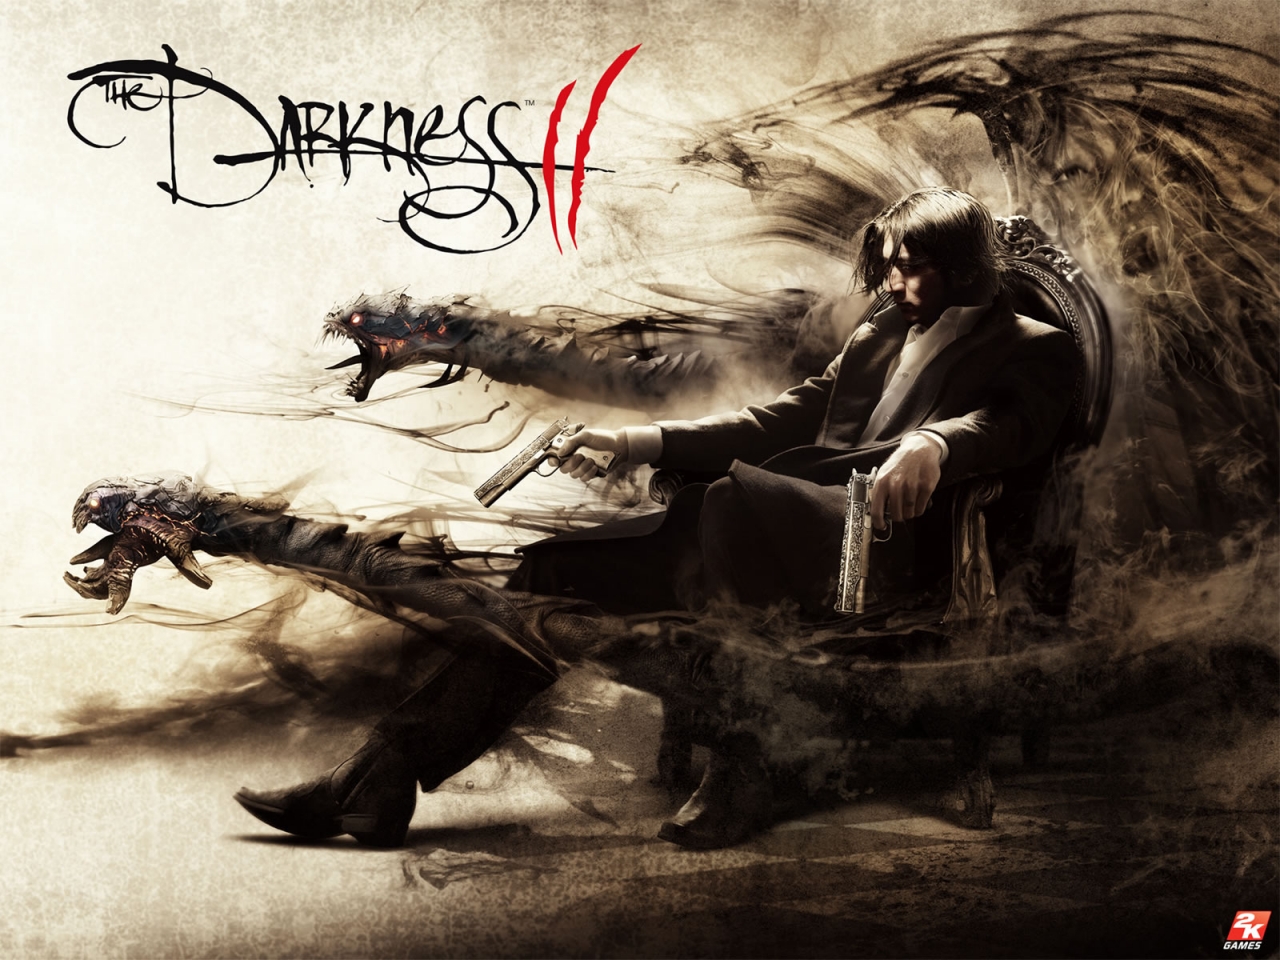 The Darkness II for 1280 x 960 resolution